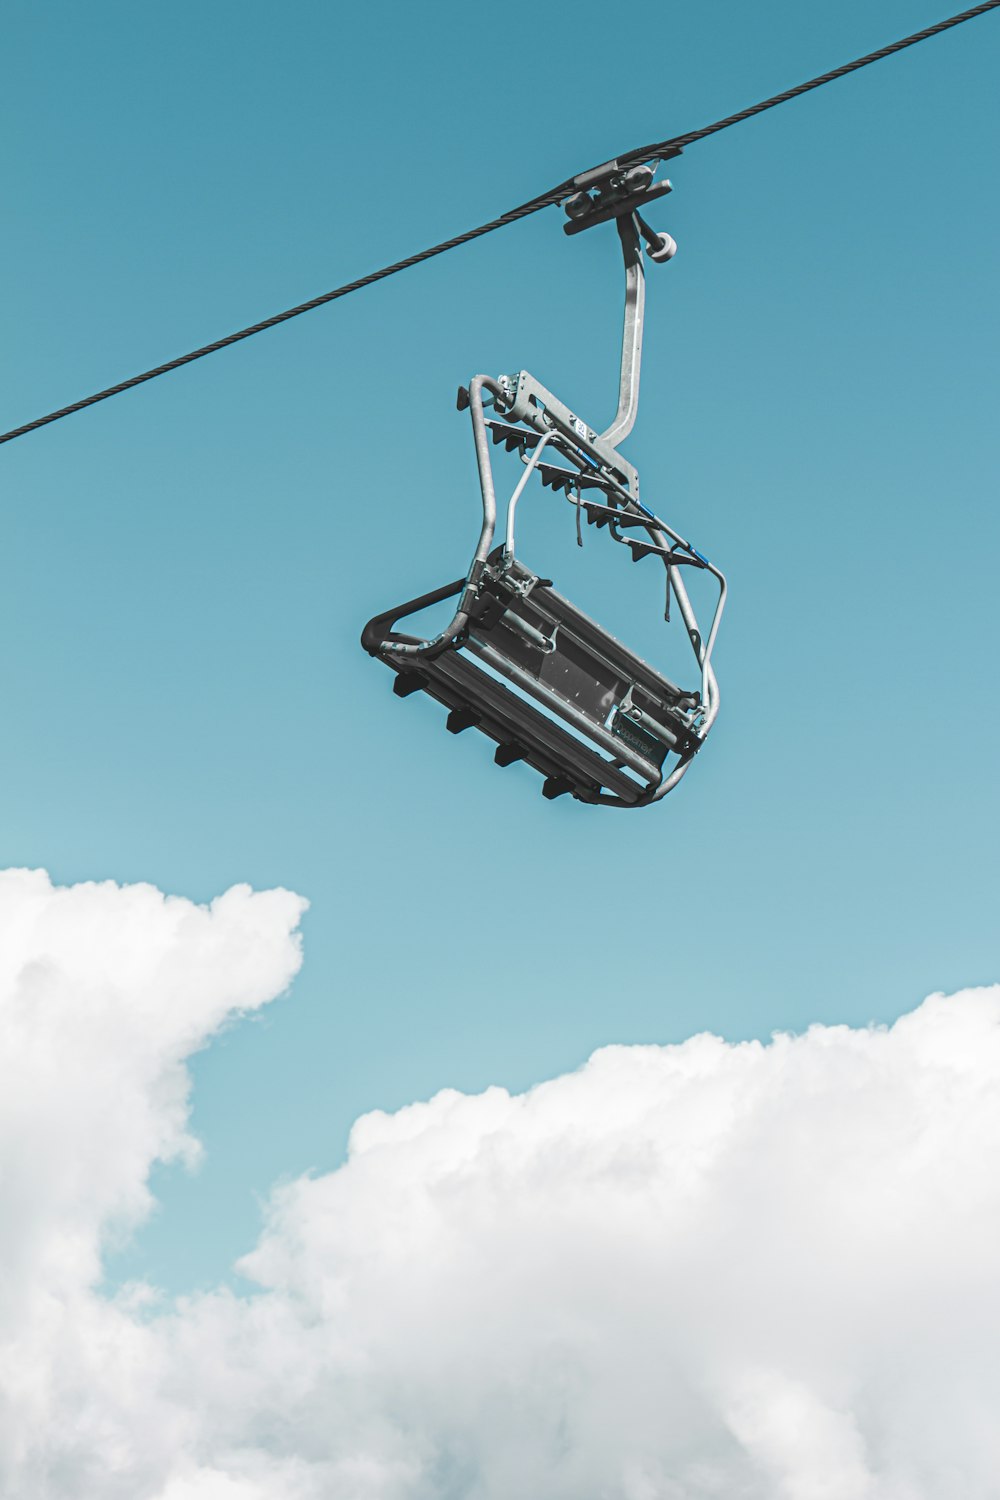 black cable car under blue sky and white clouds during daytime